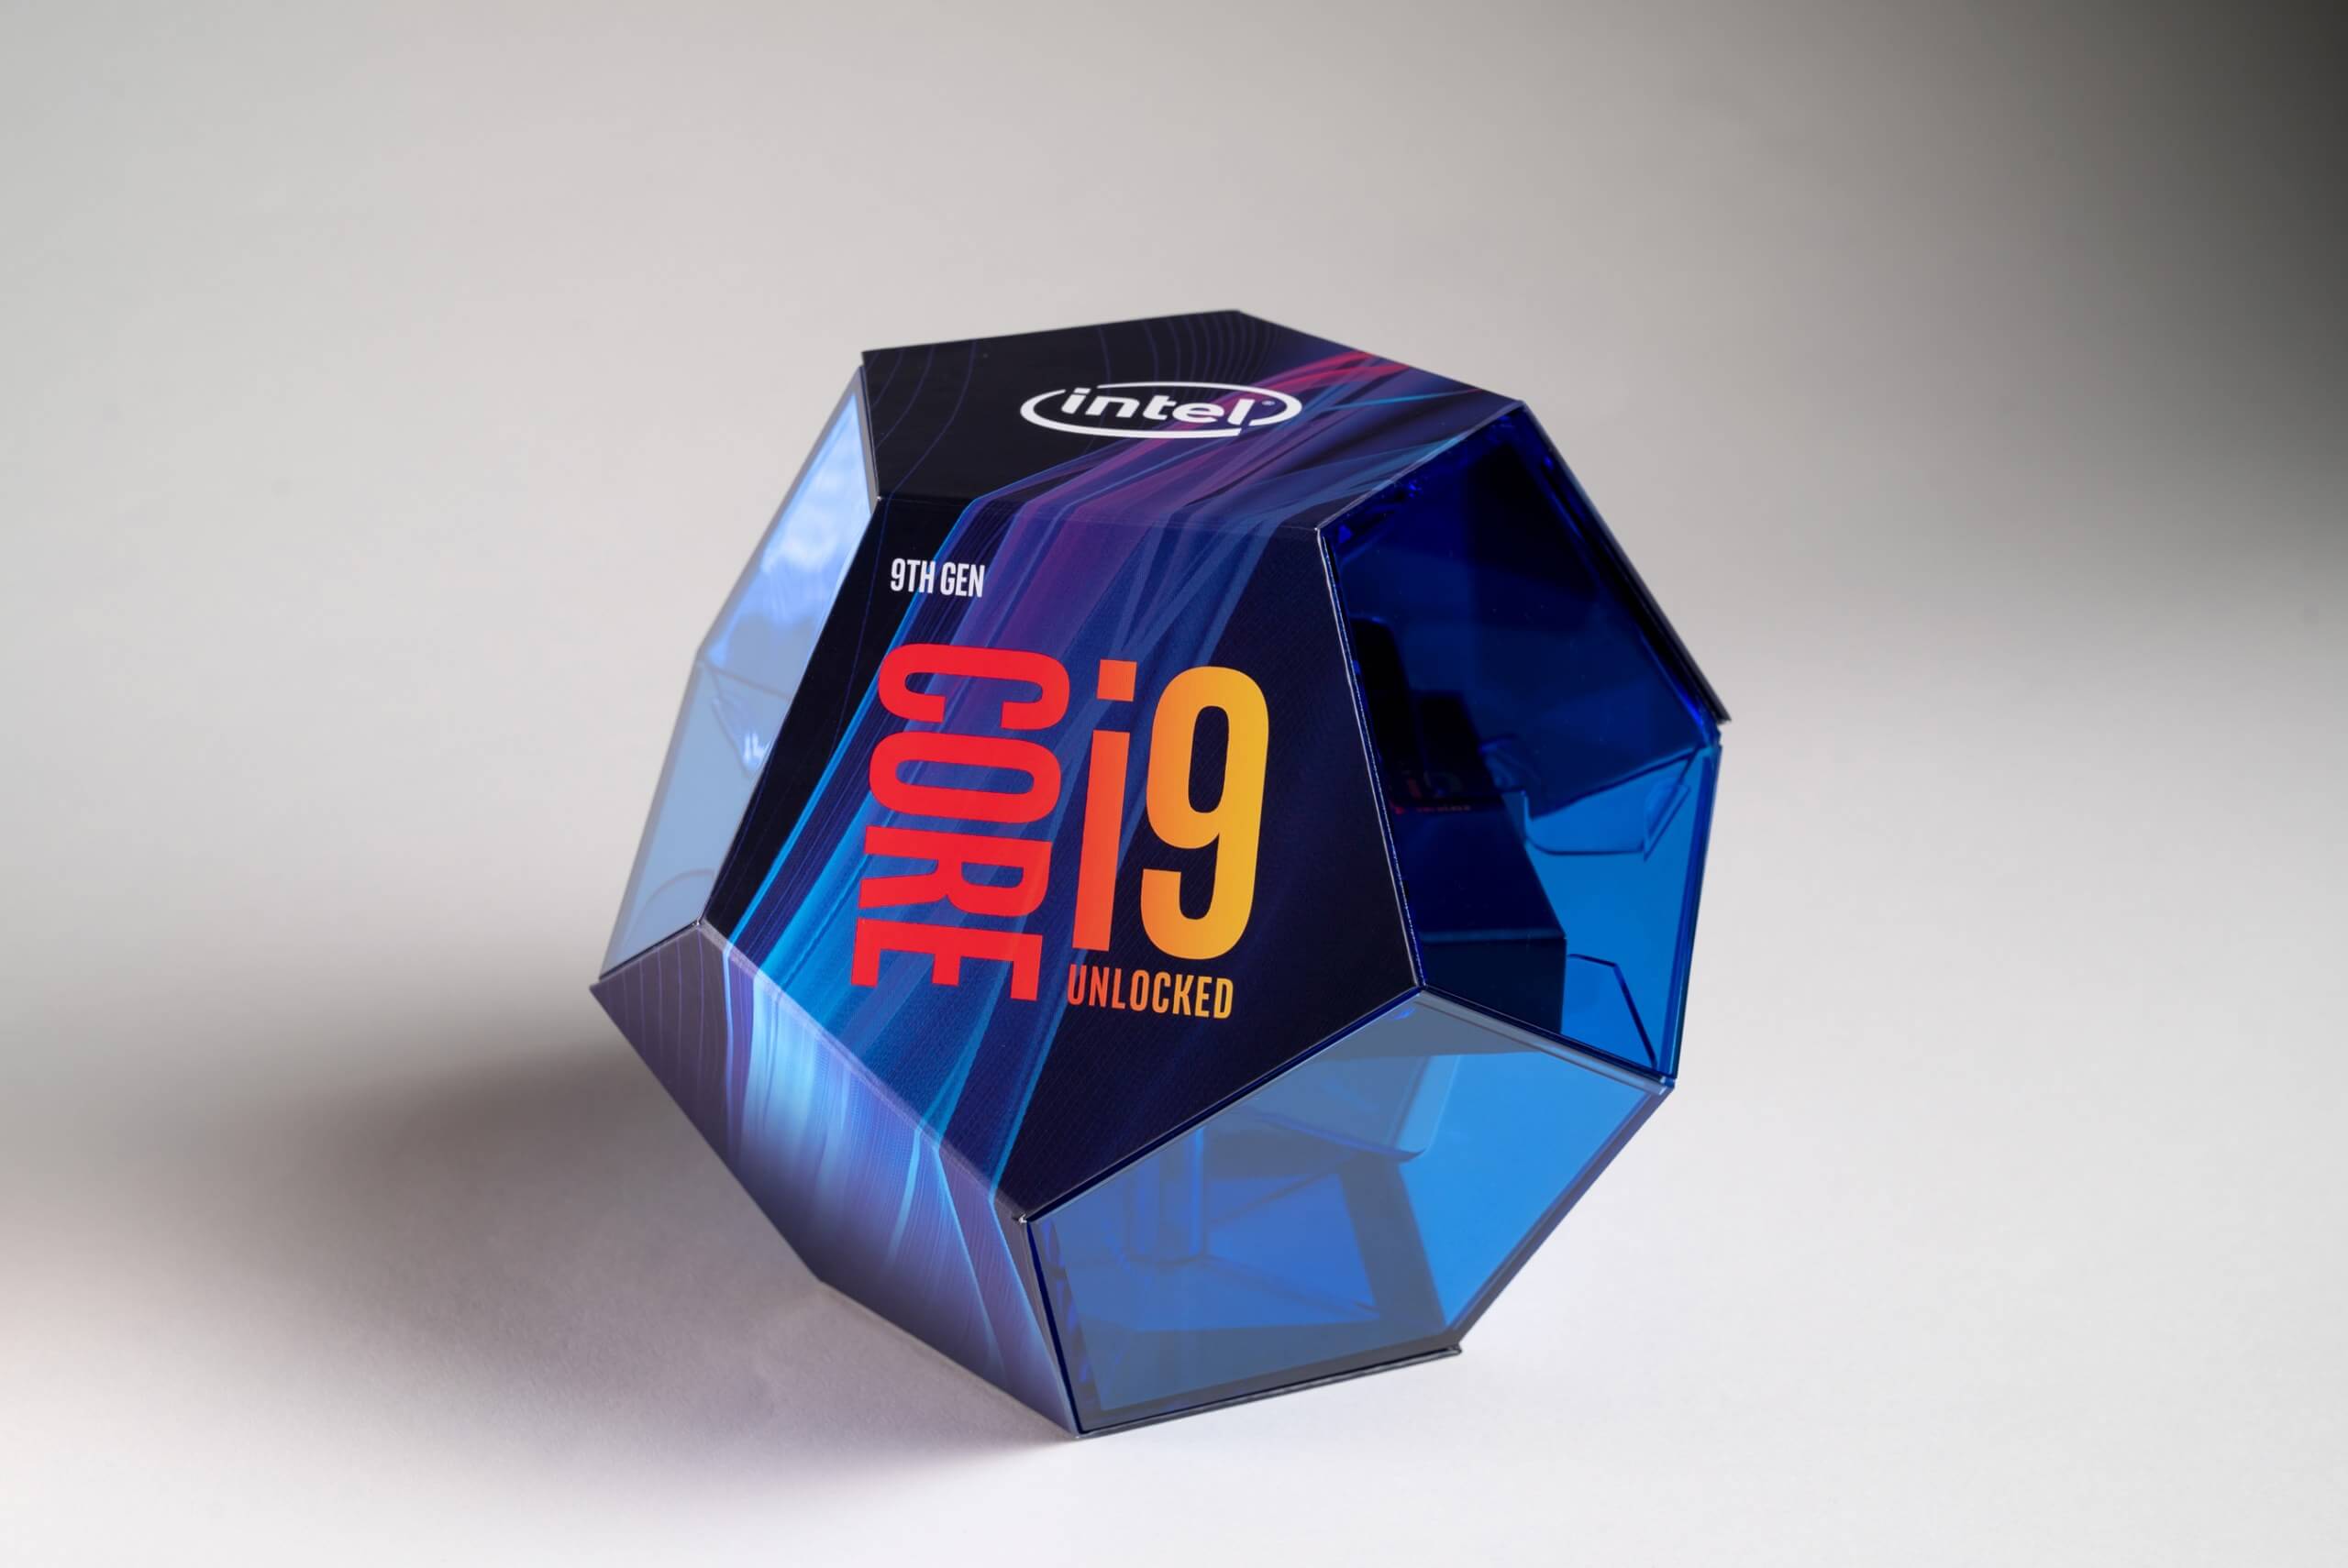 Intel Core I9 9900K And Core I7 9700K Review